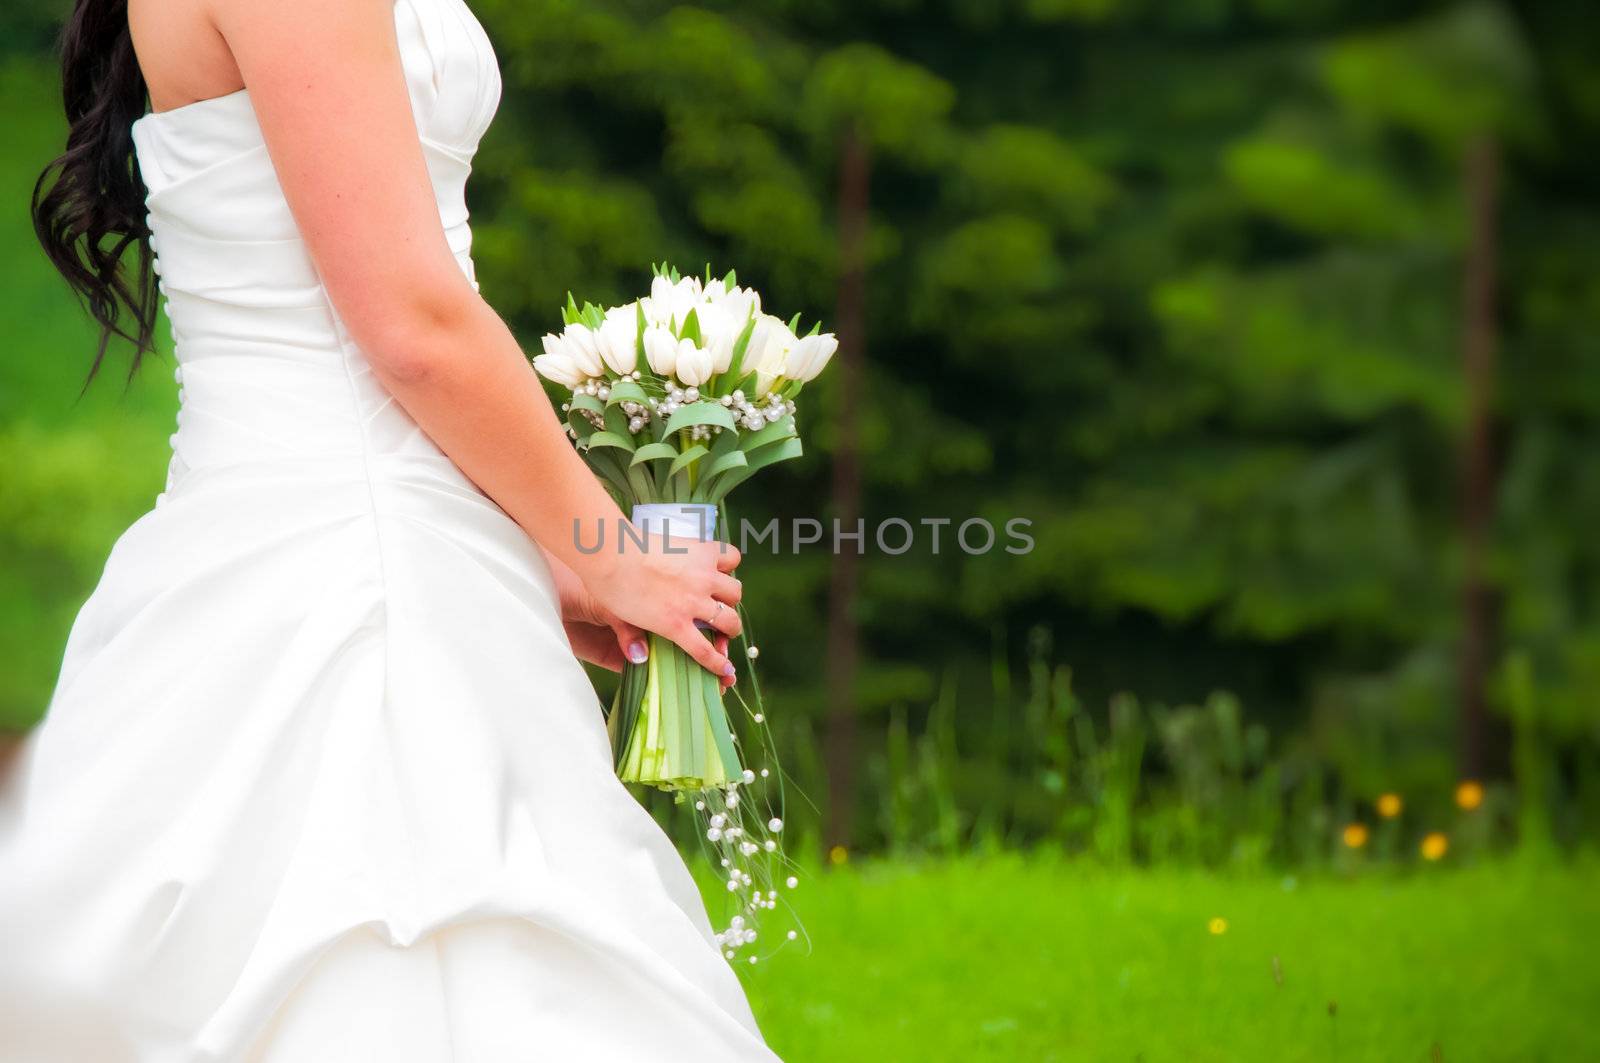 Detail of the bride in white dress with flowers by martinm303